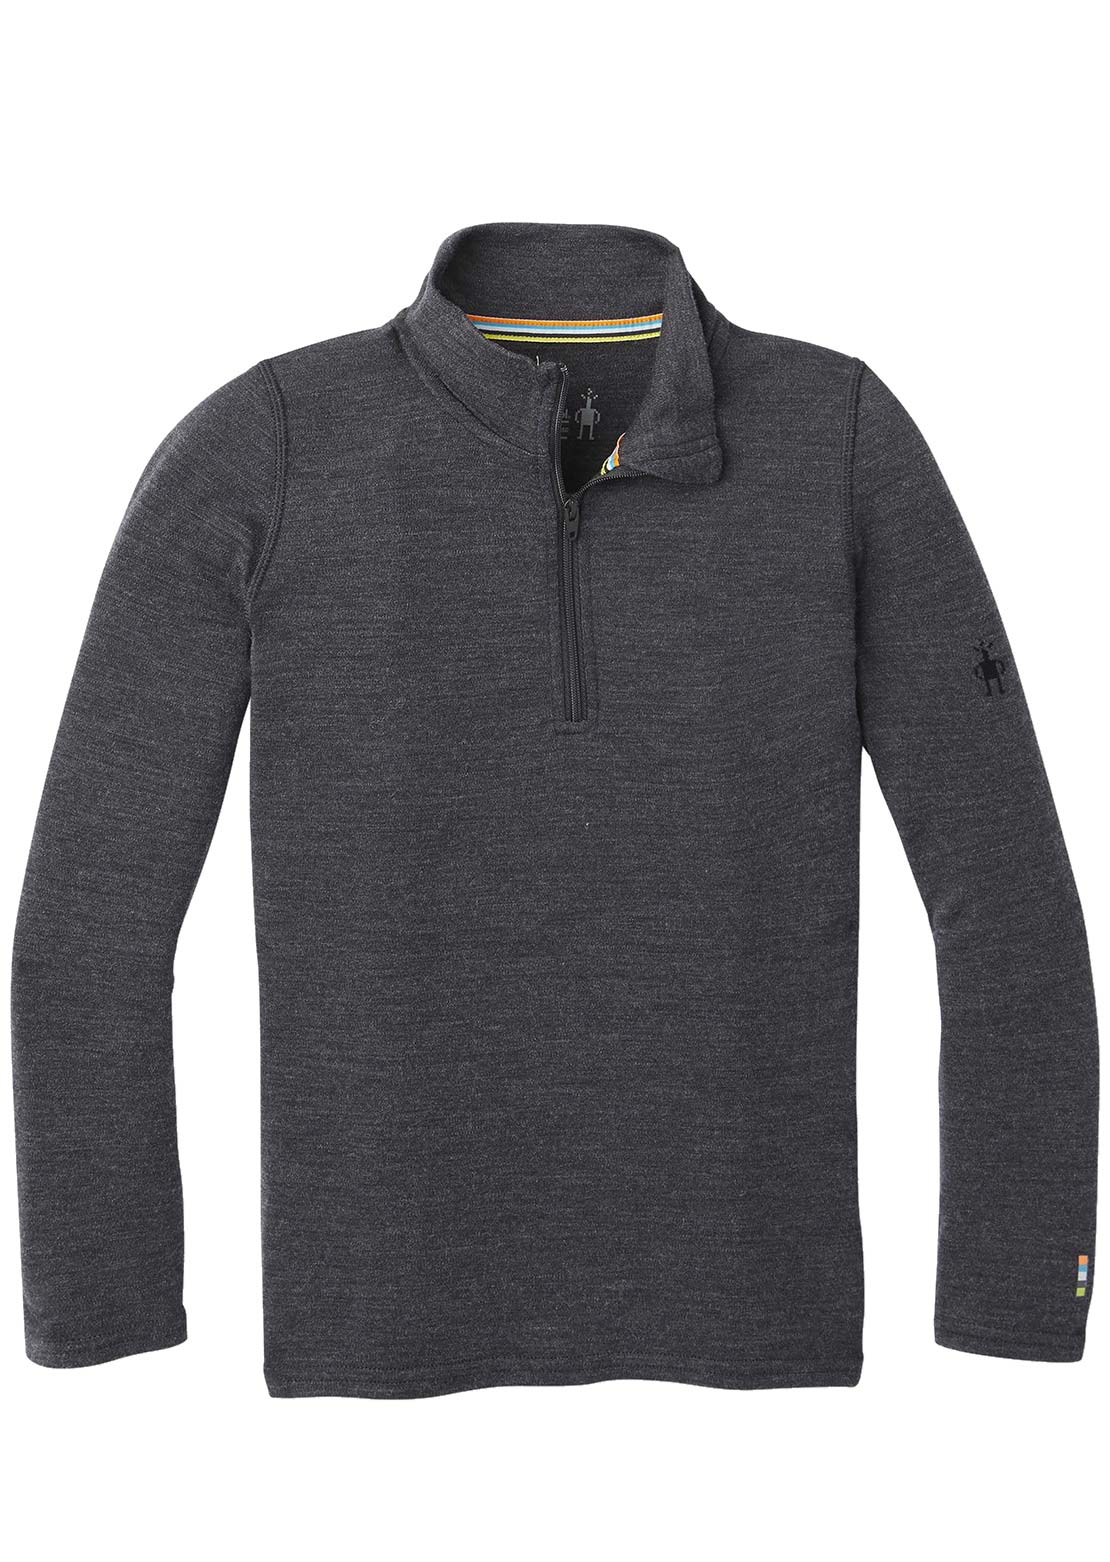 Smartwool Junior Classic Thermal Merino Base Layer 1/4 Zip Boxed Top Charcoal Heather